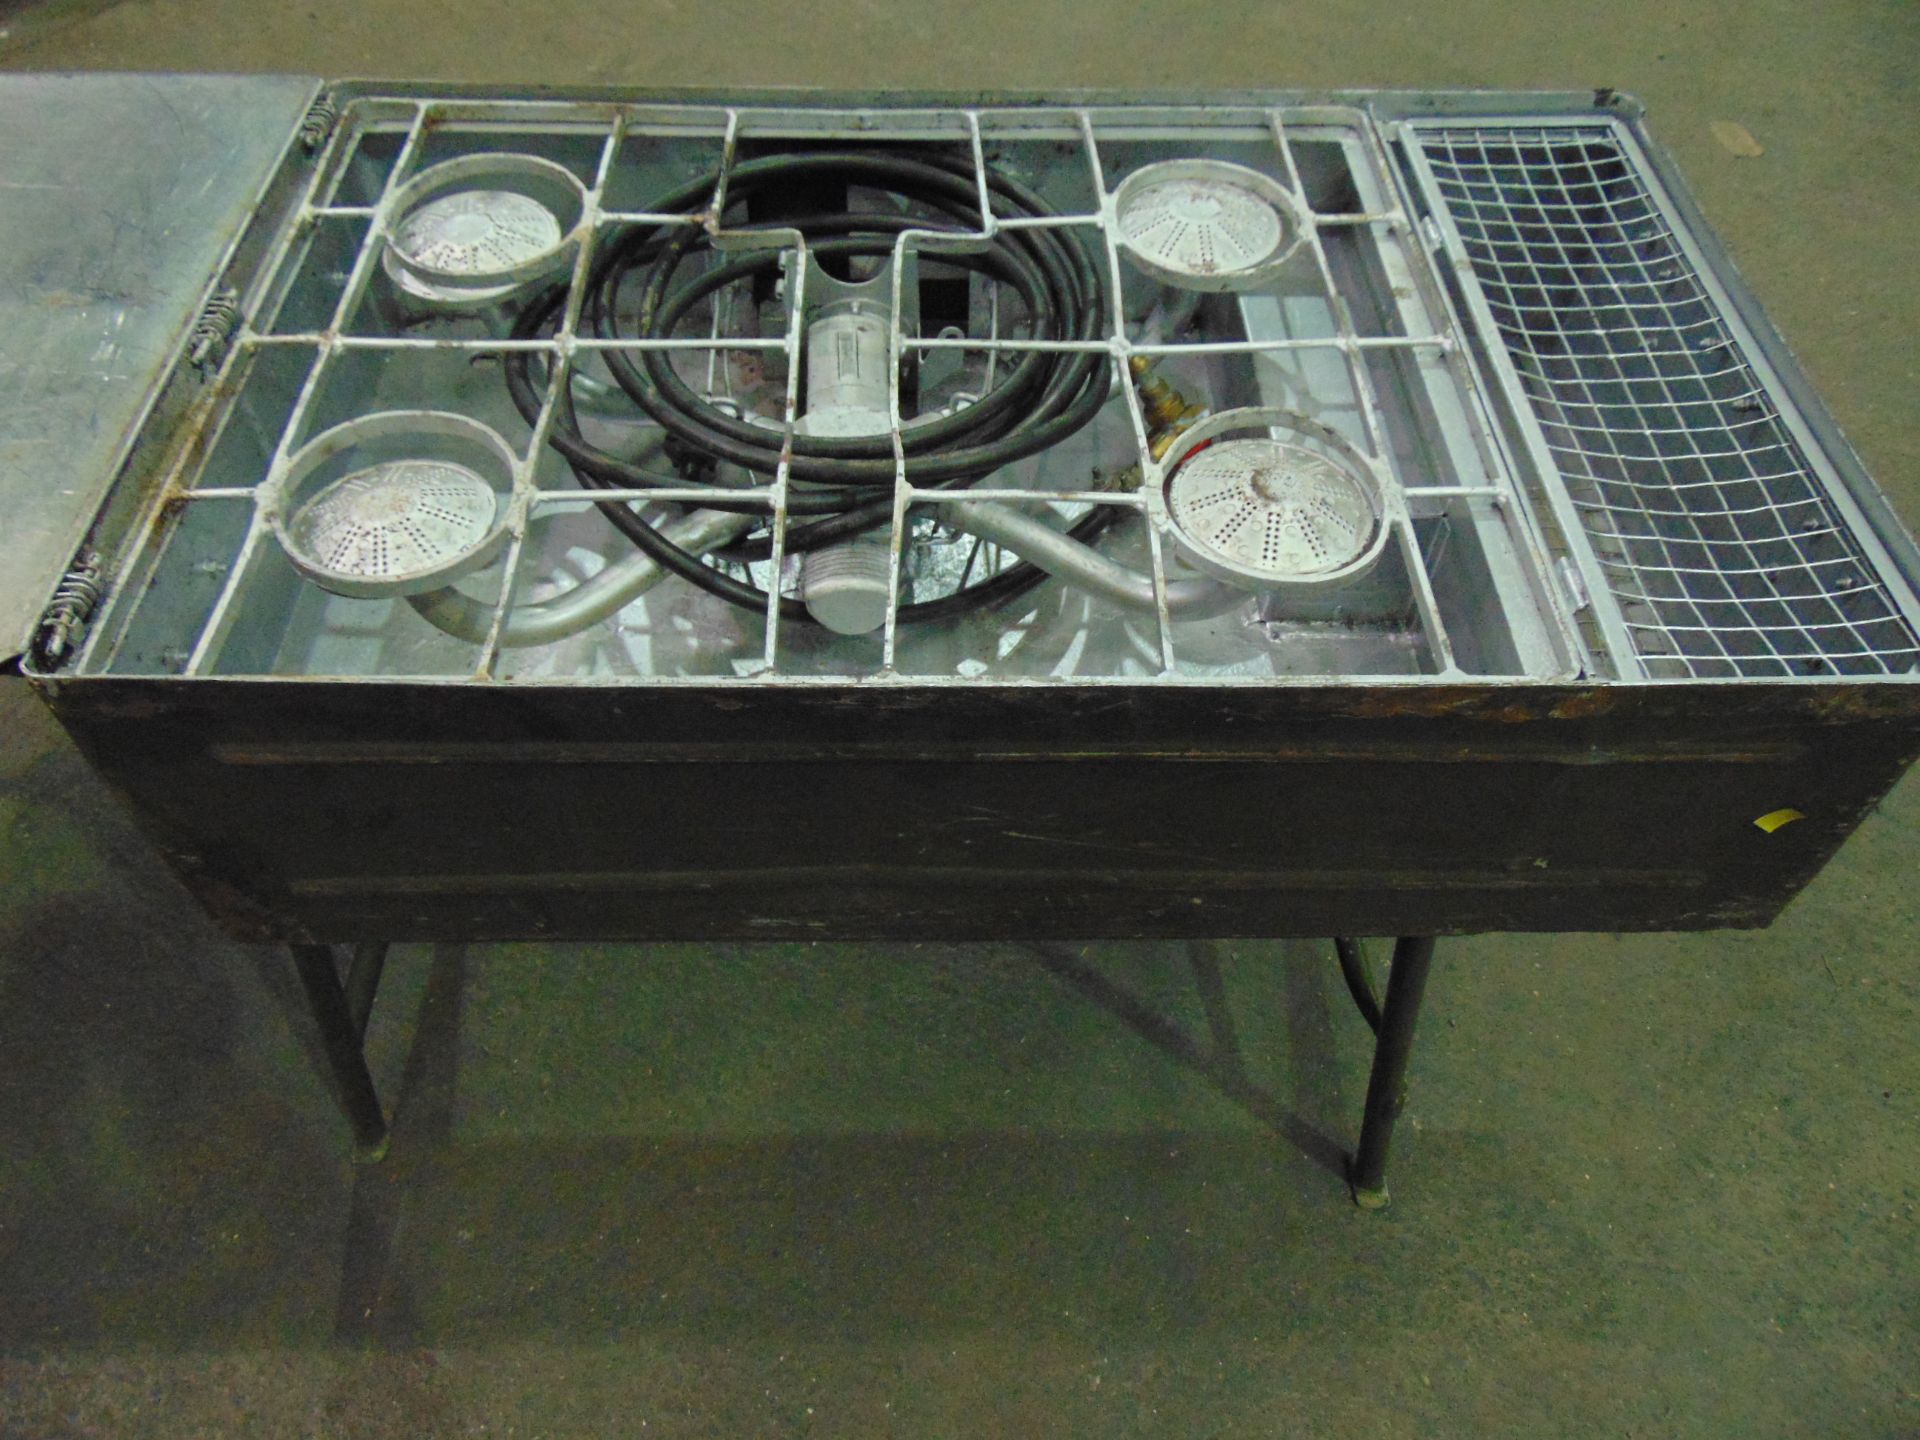 Field Kitchen No5 4 Burner Propane Cooking Stove - Image 4 of 7